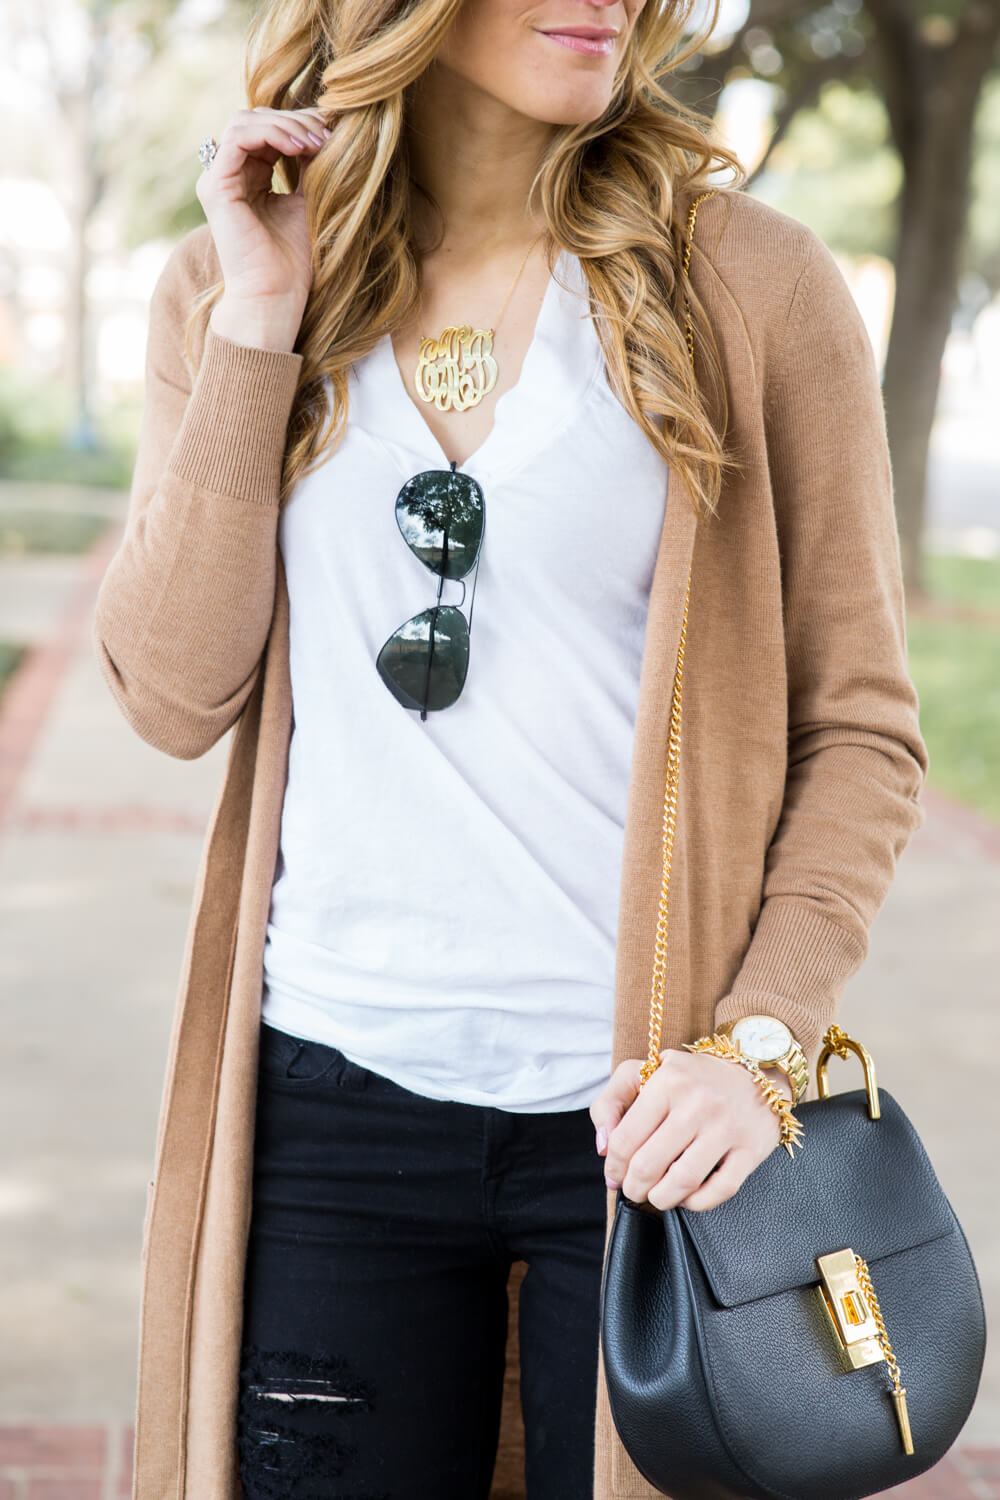 long camel cardigan, black distressed jeans, white t-shirt, black floppy hat, leopard heels, how to wear leopard outfit, dressed up white t-shirt outfit, trendy fall outfit, black chloe bag. fall gold accessories